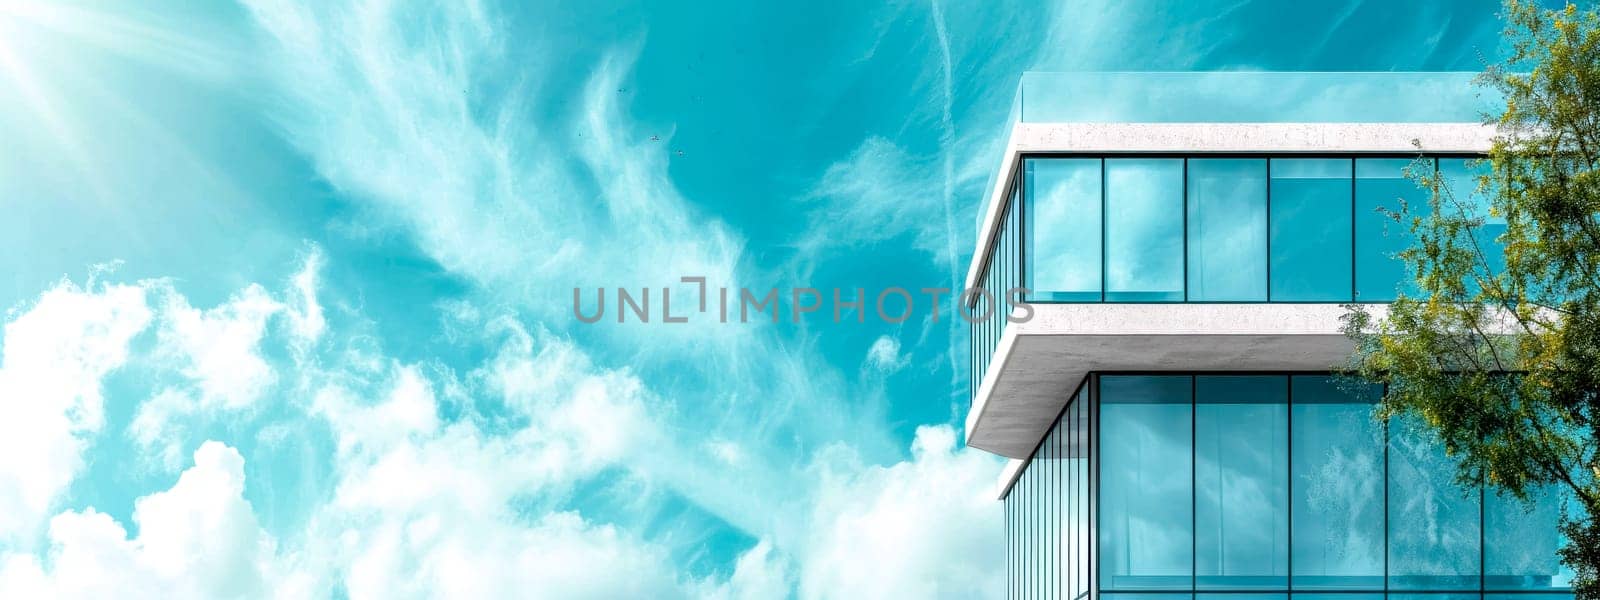 modern architecture with the corner of a contemporary building, featuring large glass windows against a vivid blue sky with fluffy clouds, eco-friendly and design-focused urban environment, copy space